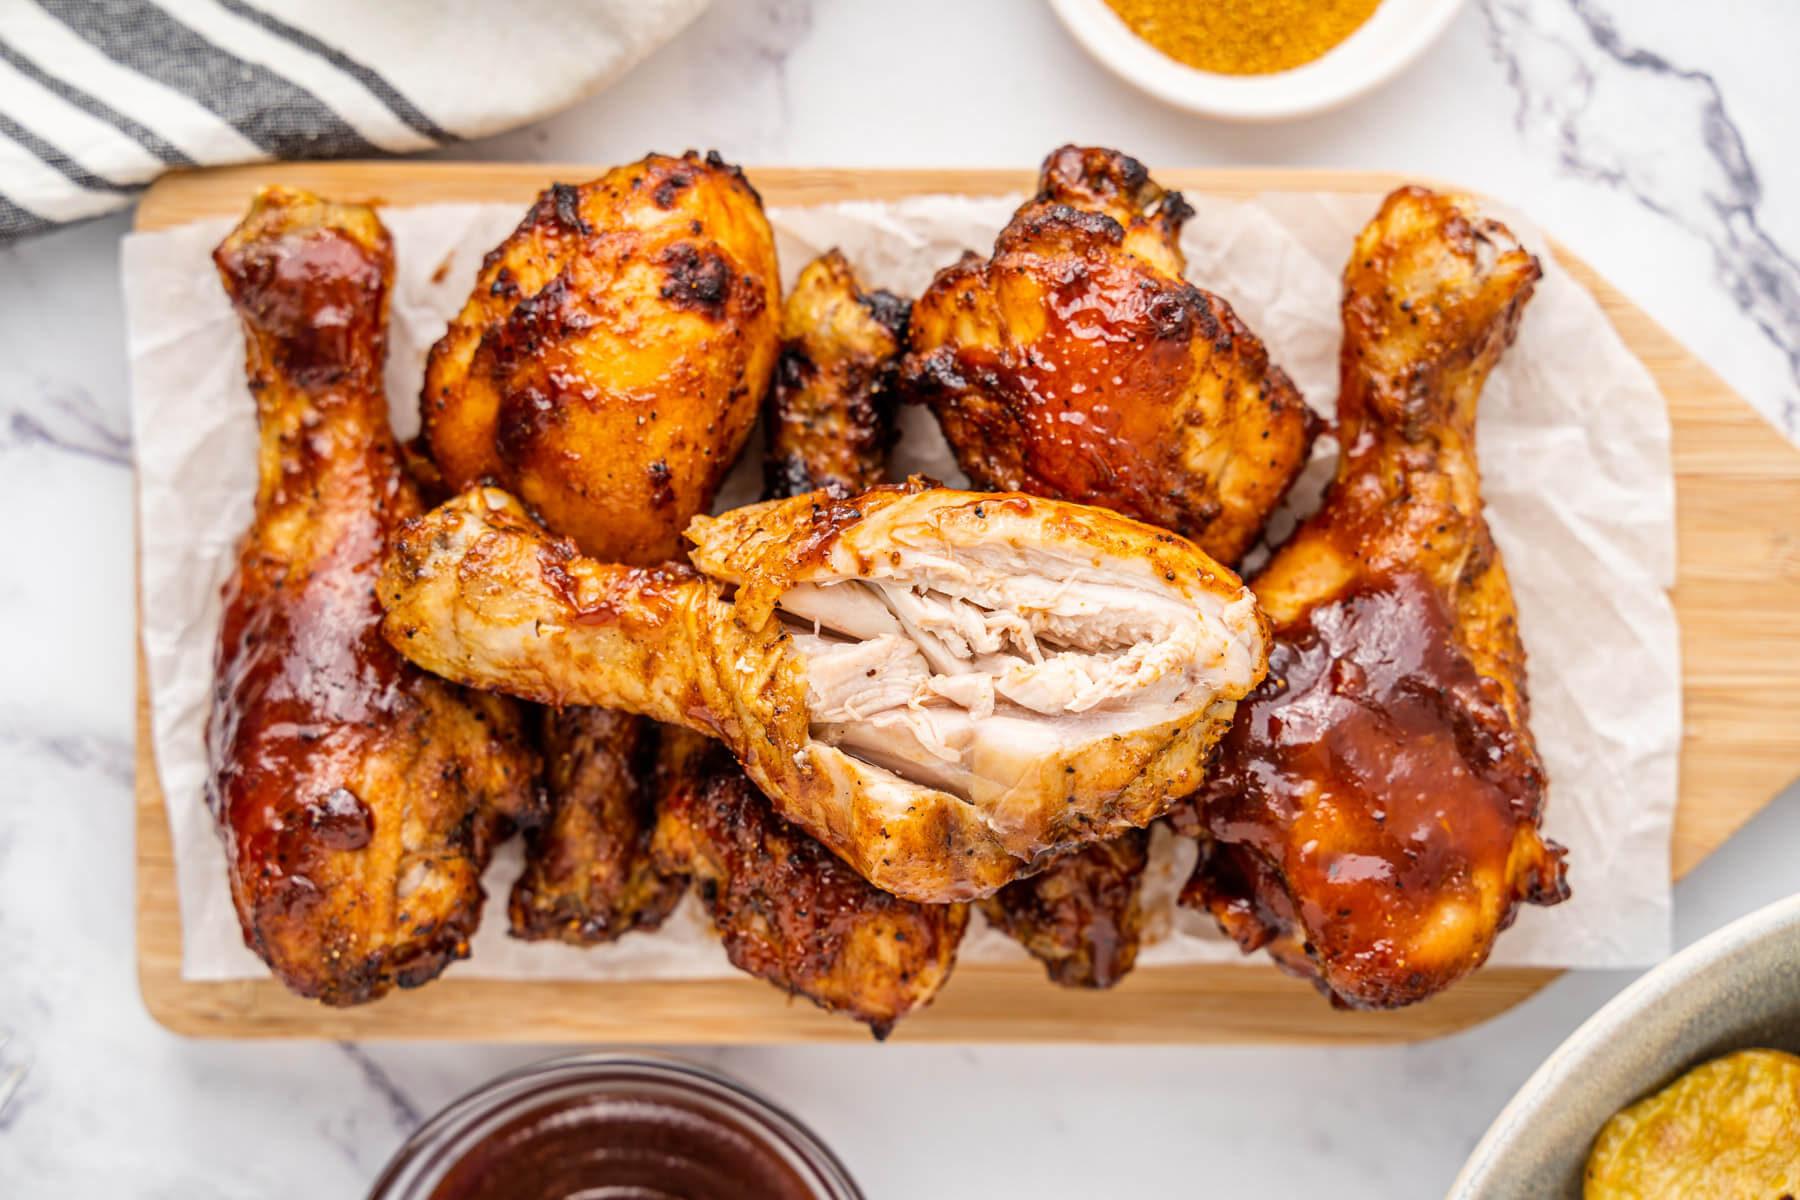 Crispy cooked chicken drumsticks coated in barbecue sauce with the one on top cut open to show the juicy interior.